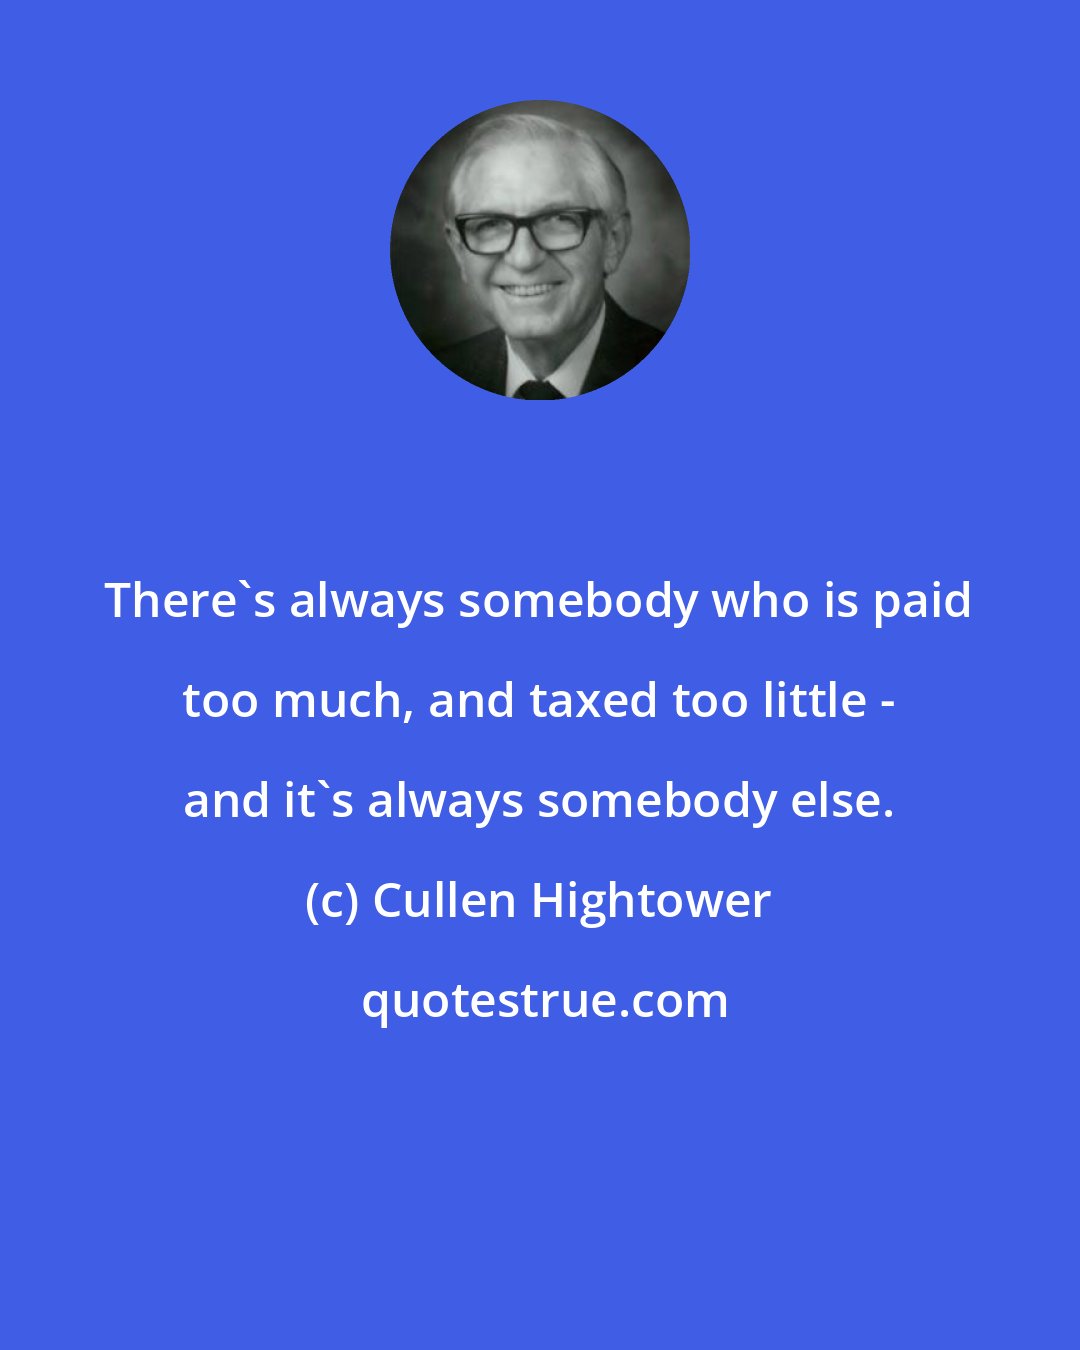 Cullen Hightower: There's always somebody who is paid too much, and taxed too little - and it's always somebody else.